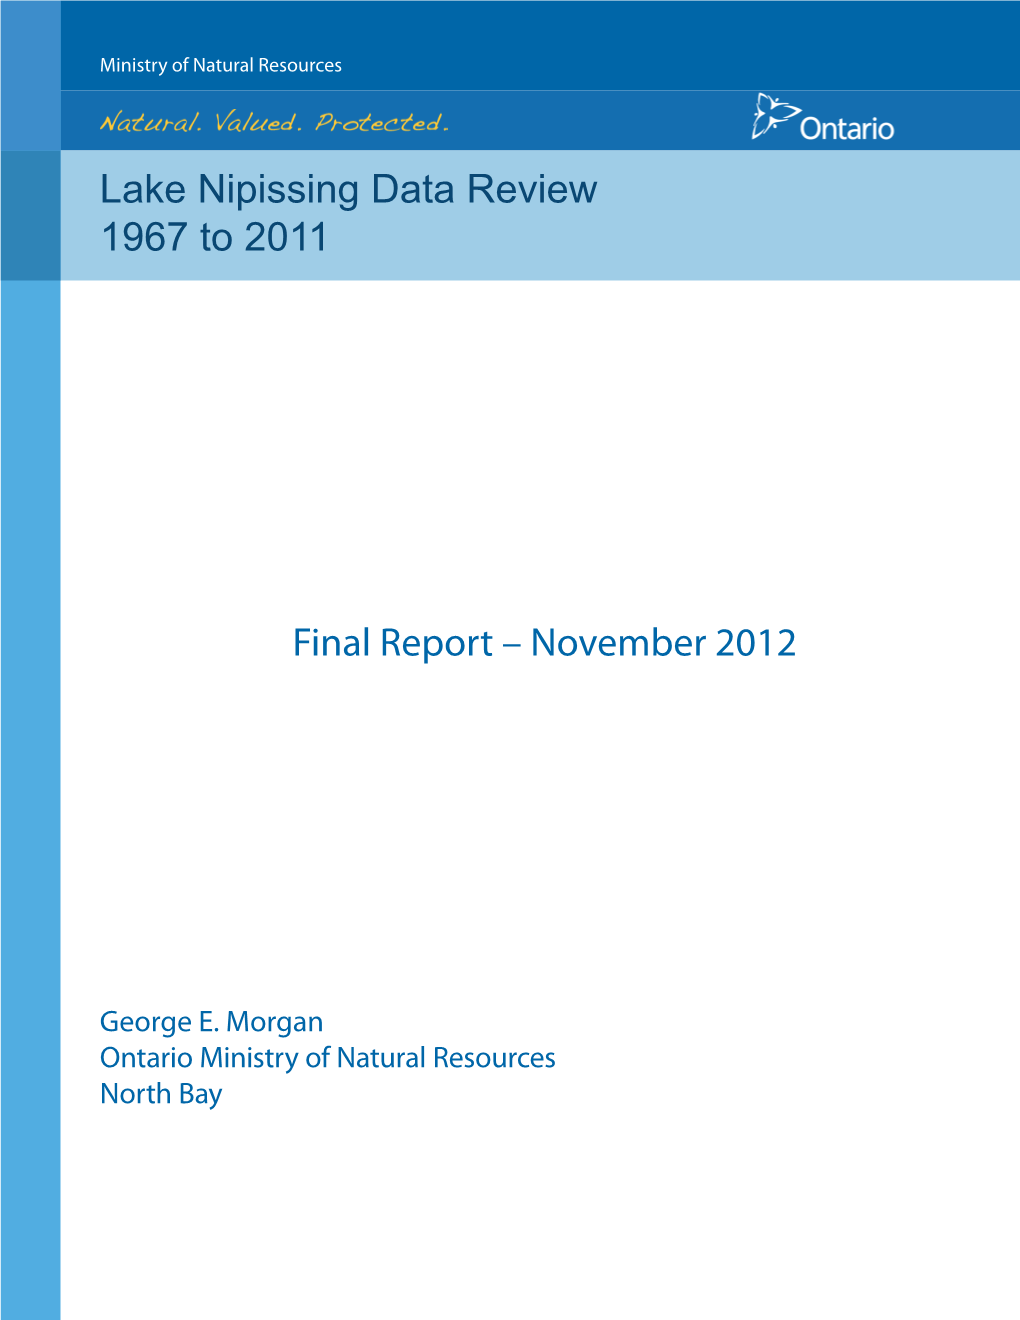 Lake Nipissing Data Review 1967 to 2011 Final Report